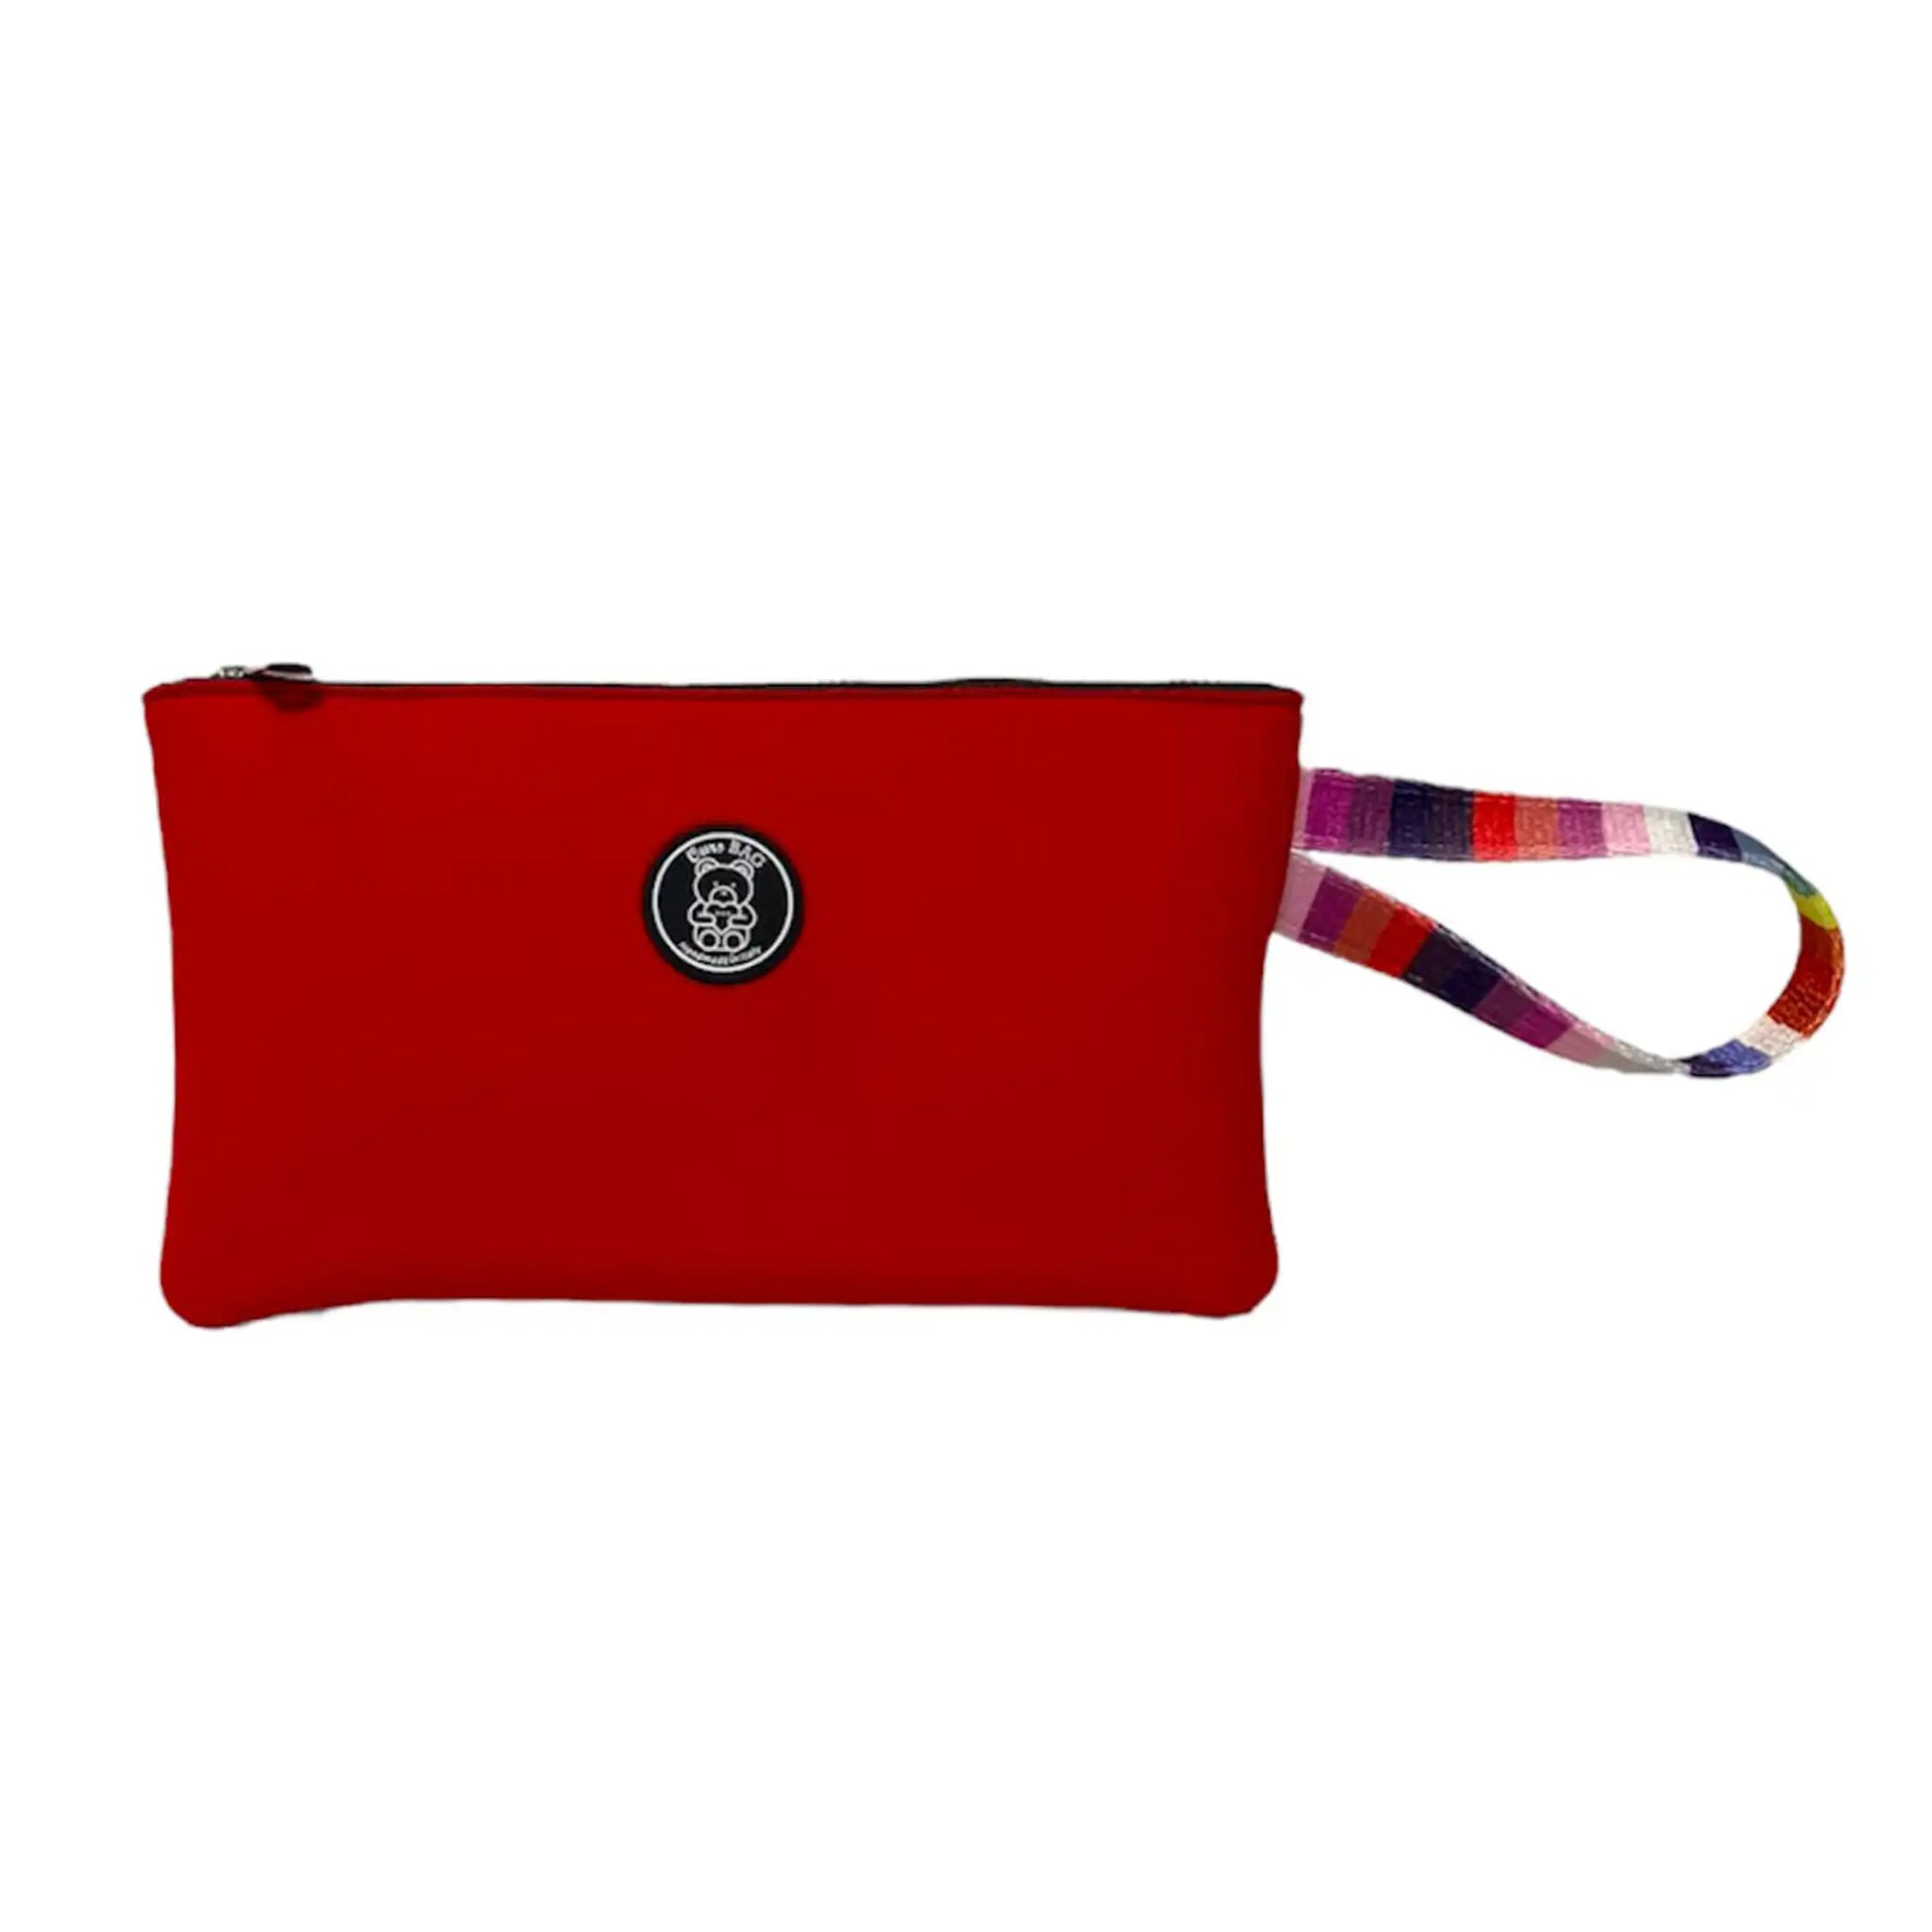 Clutch Ours Bag (Red)